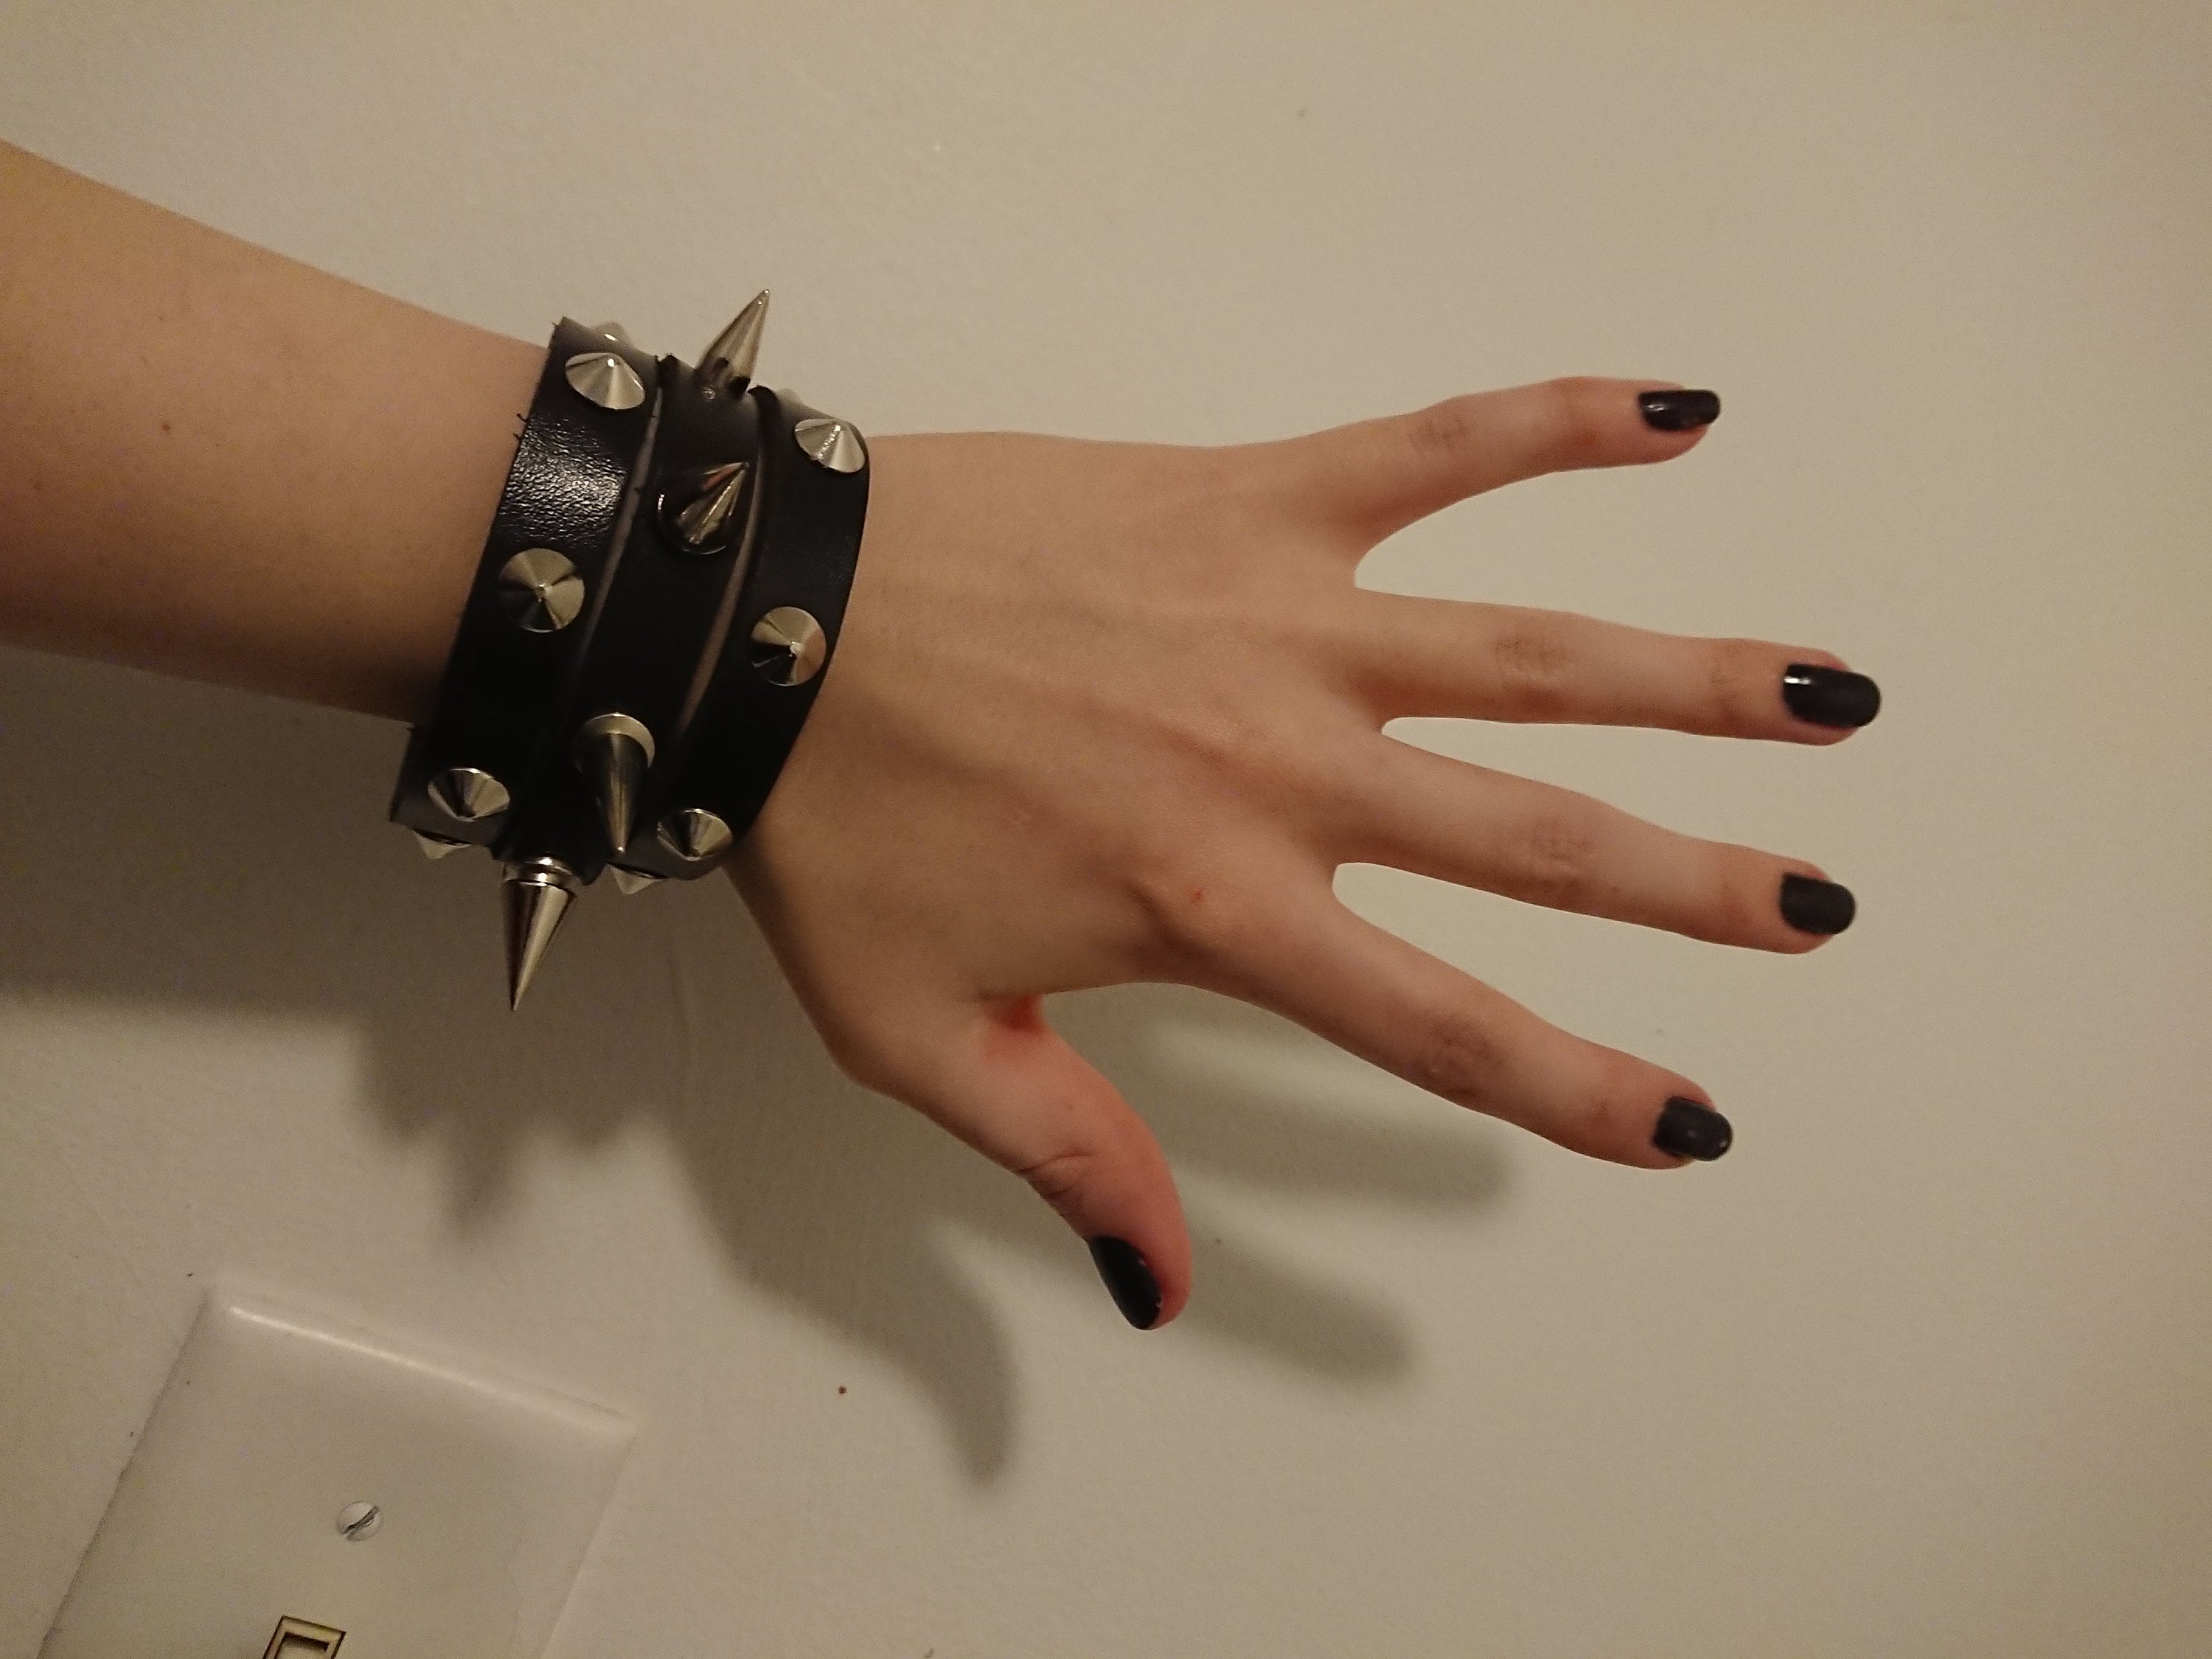 Pair of 3 Punk in Unisex One Black Etsy Gothic Spikes Wrist Alternative Metal Emo Goth Leather Bracelets, - Cuffs, Spiked